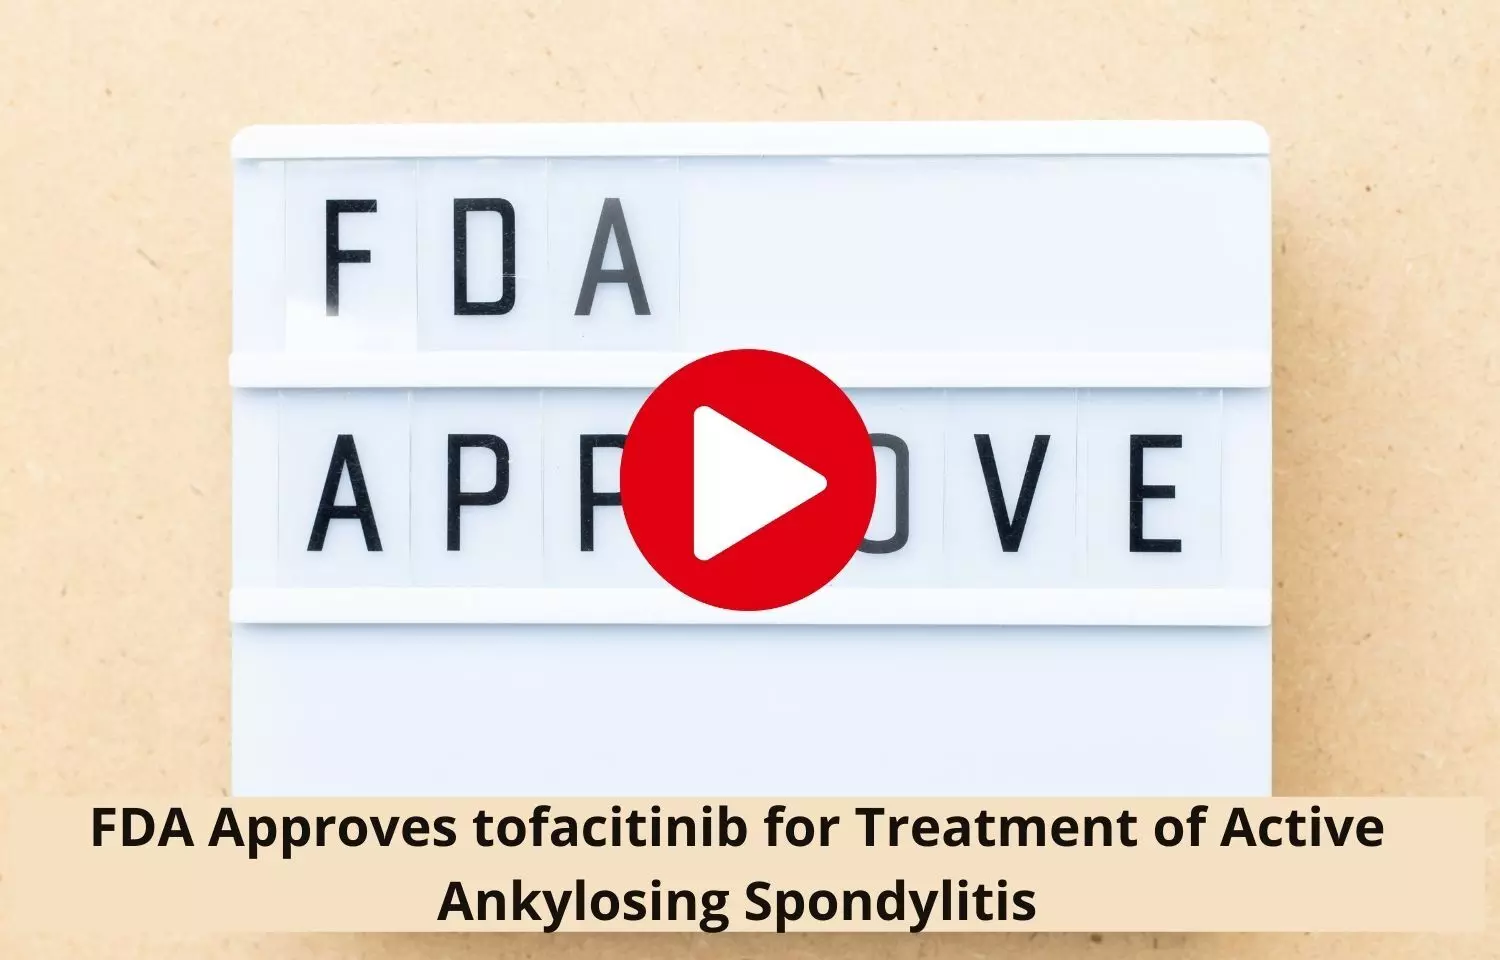 Tofacitinib approved by FDA for Active Ankylosing Spondylitis